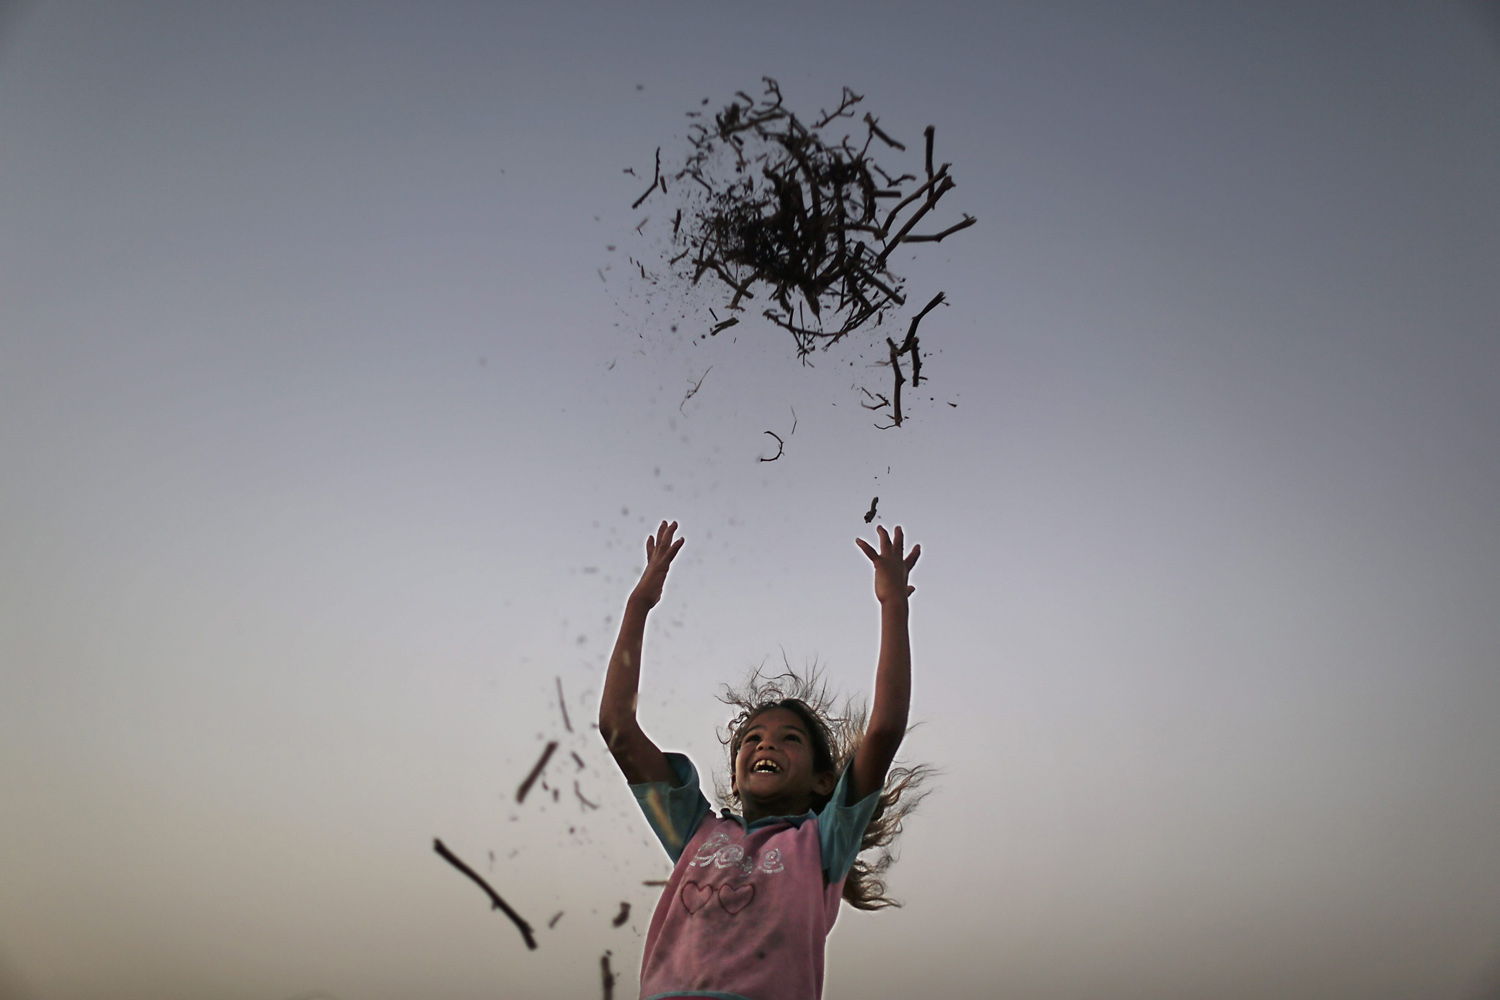 A Palestinian girl play outside her family's tent in a poverty-stricken quarter of the town of Younis